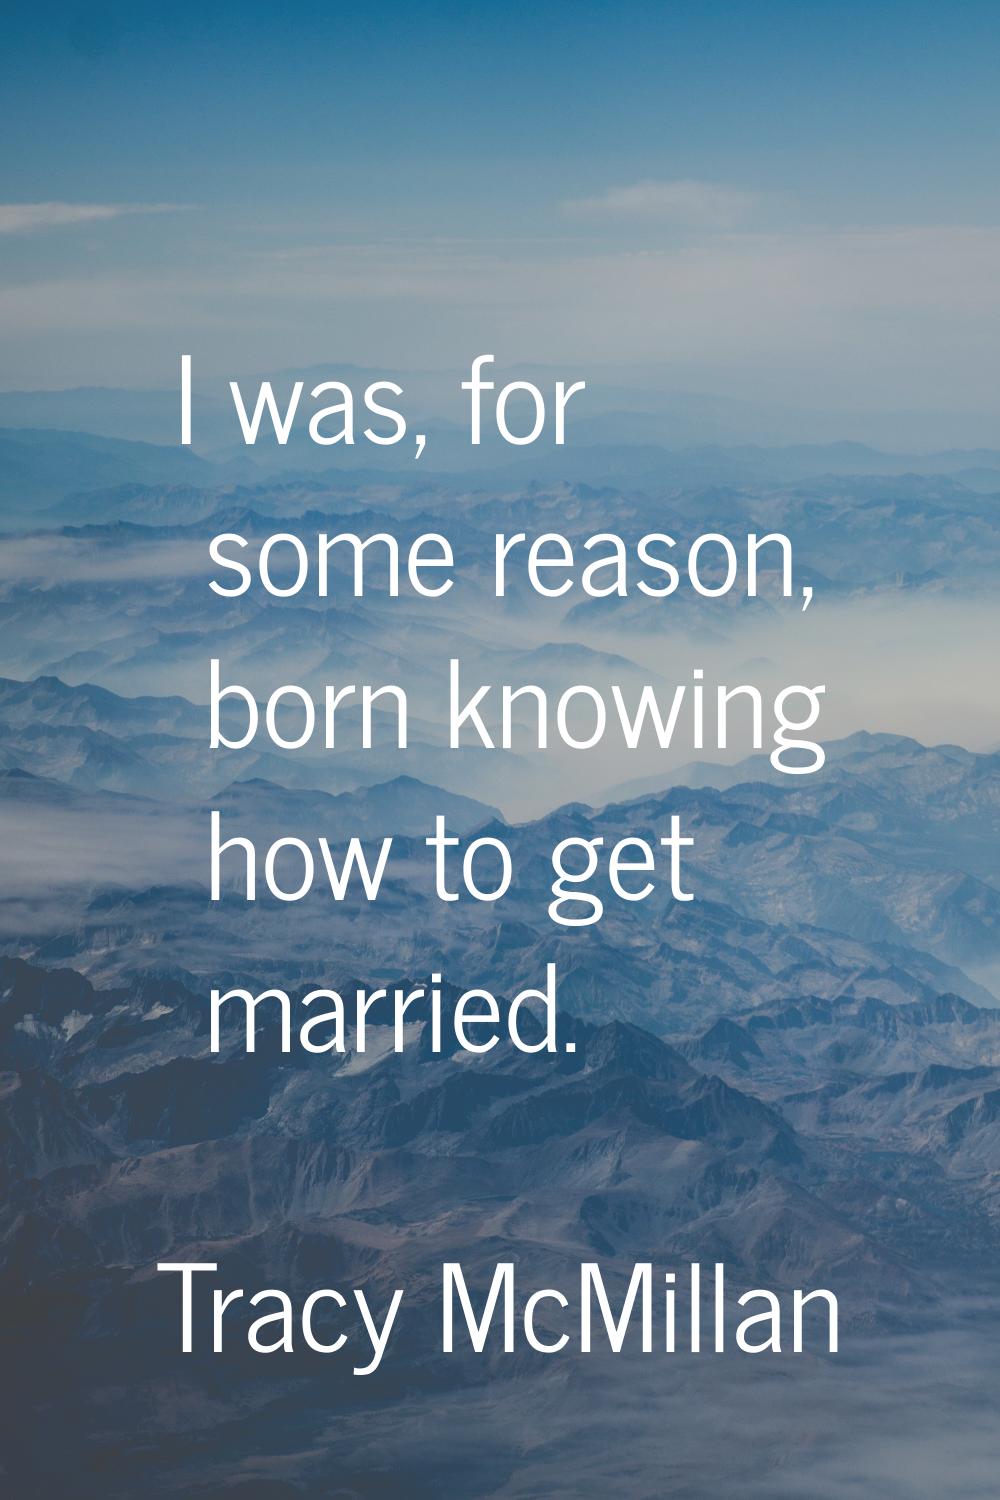 I was, for some reason, born knowing how to get married.